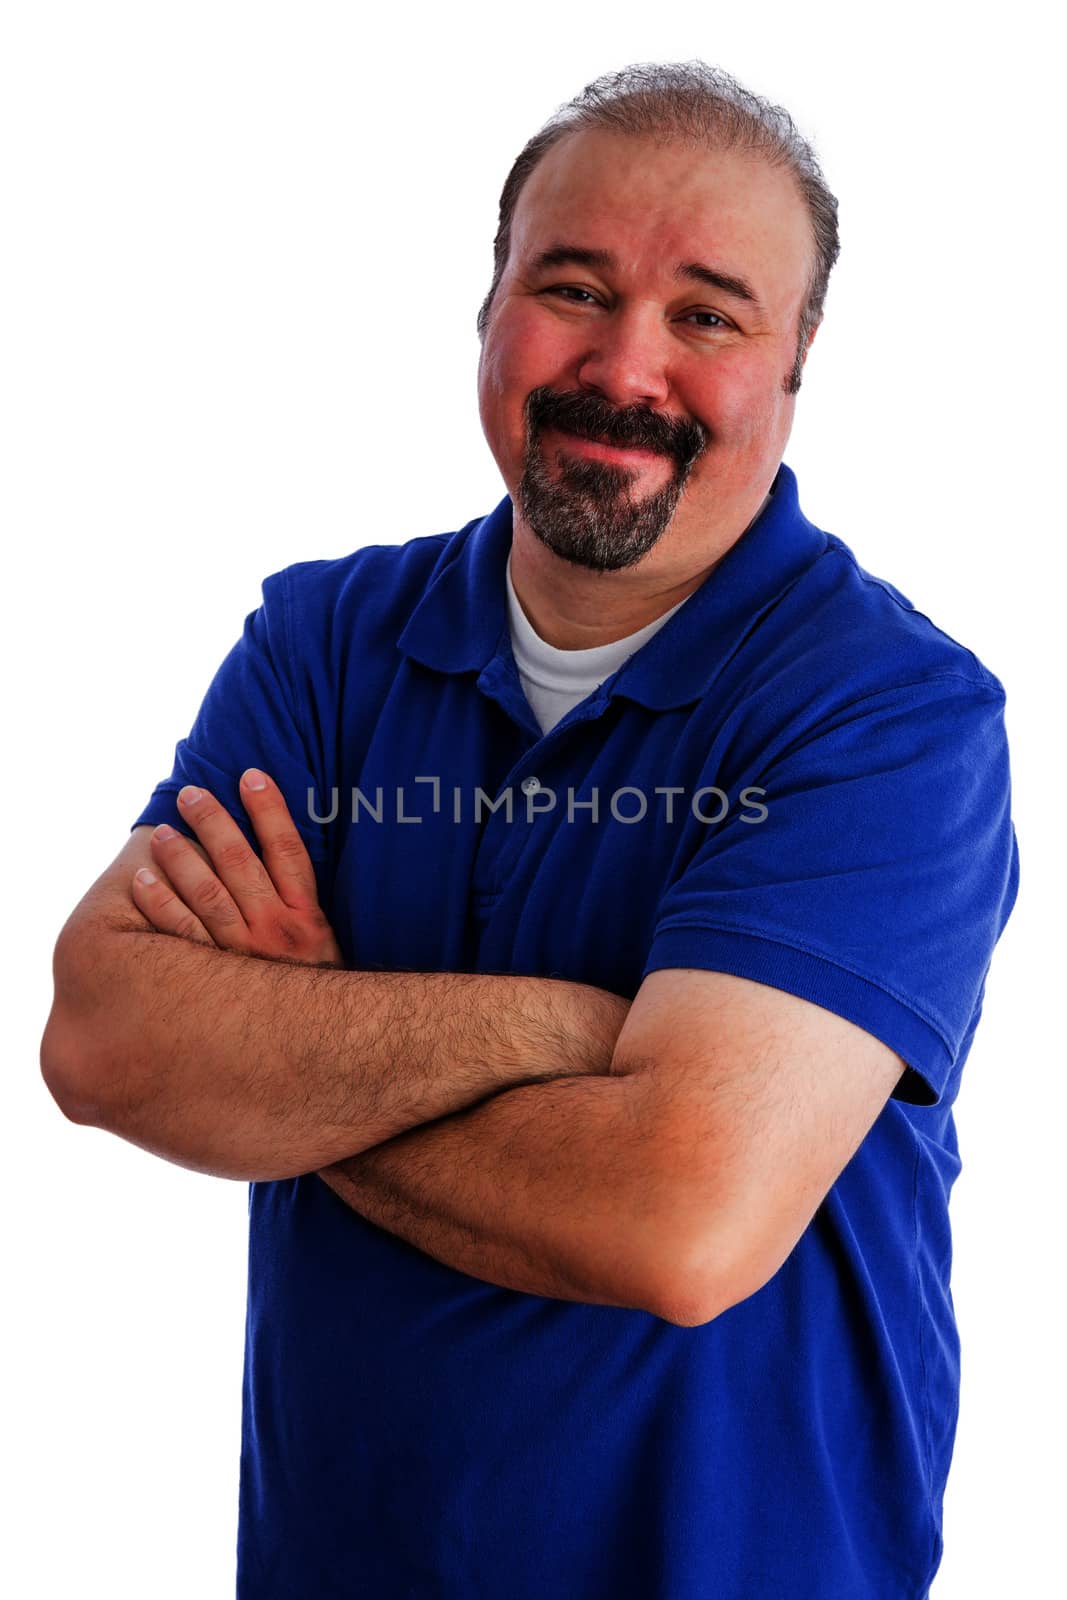 Close up Portrait of a Smiling Bearded Adult Guy in Blue Polo Shirt, Crossing his Arms over His Stomach While looking at the Camera. Isolated on White Background.